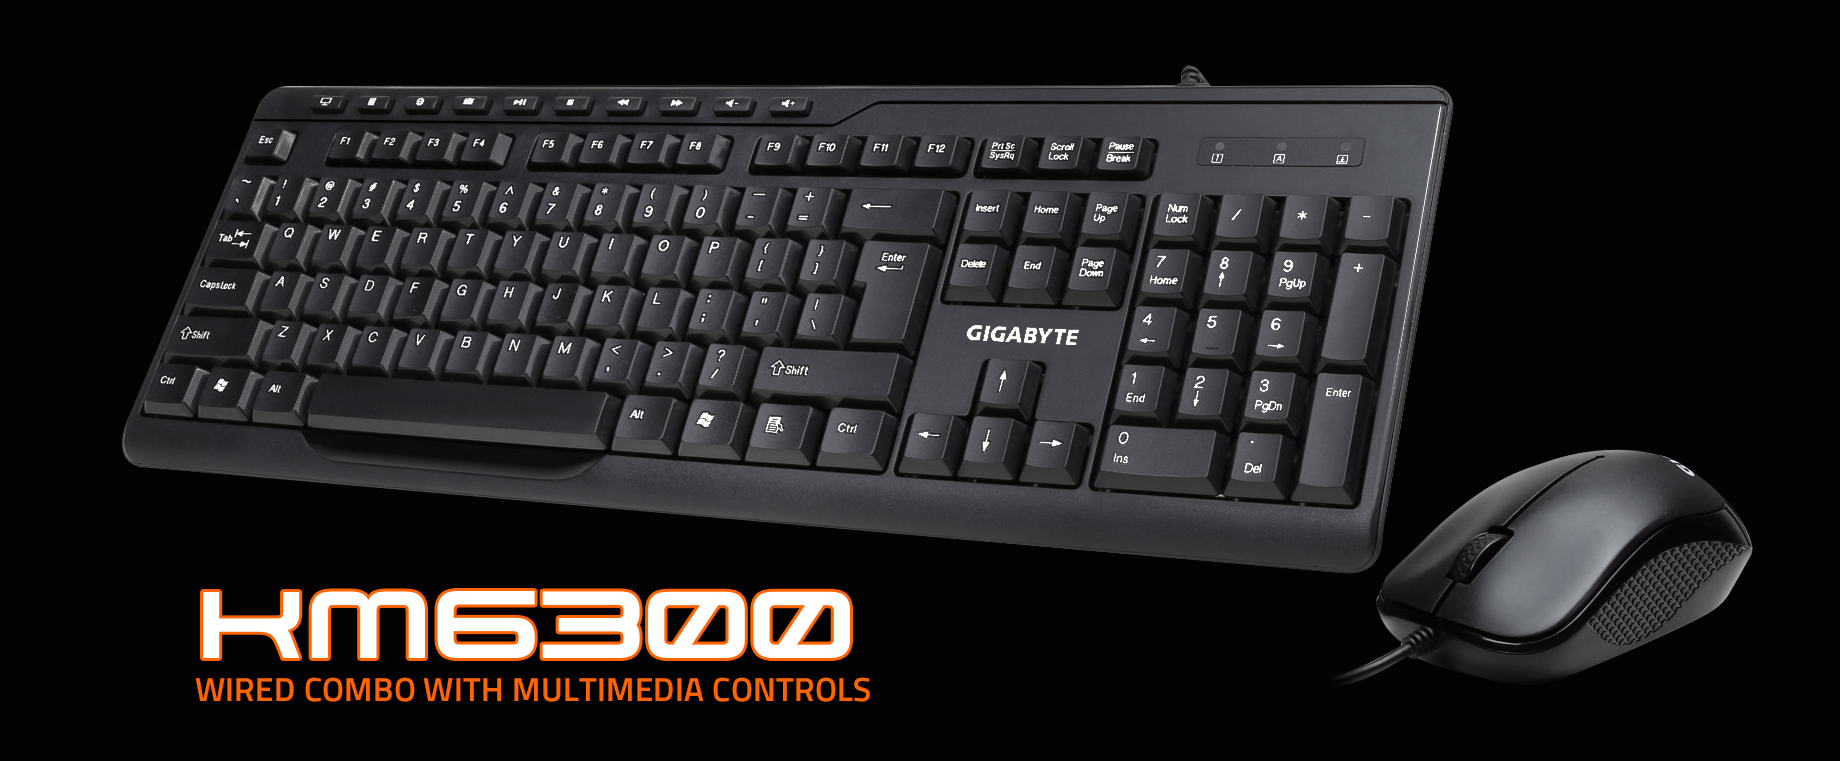 Gigabyte KM6300 Wired Keyboard&Mouse Combo Pack